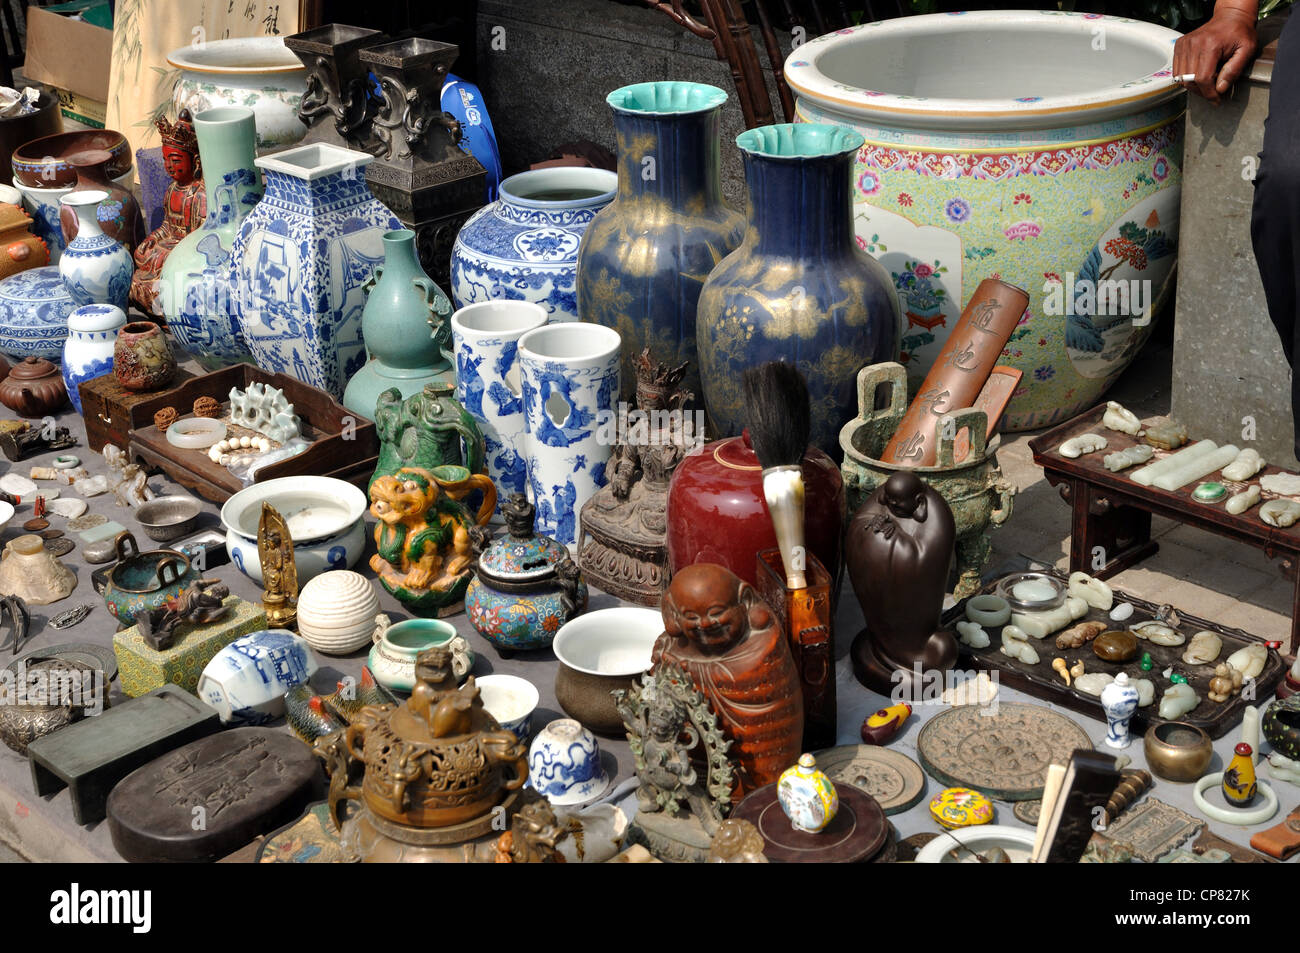 Antiques stall, Antiques Market, Shenyang Lu and surrounding streets, Tianjin, Hebei, China. Stock Photo